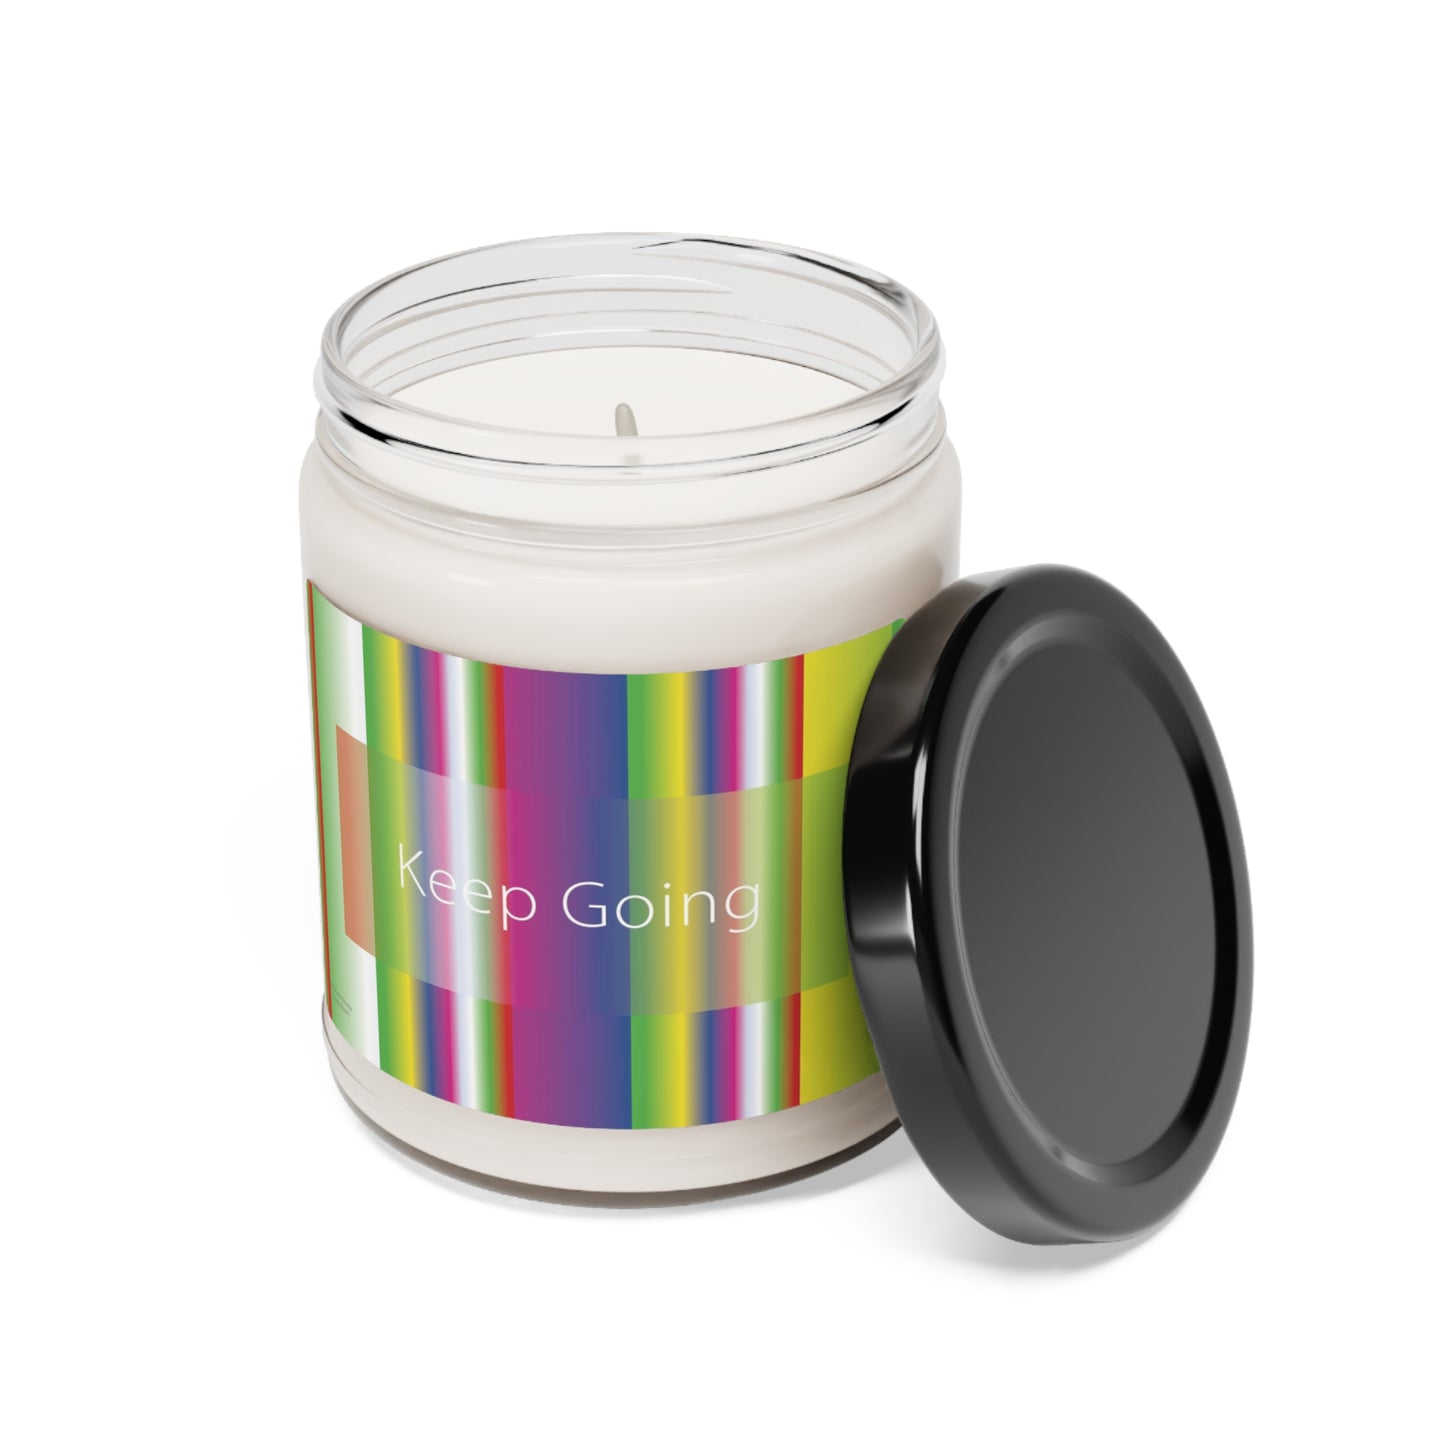 Scented Soy Candle, 9oz Keep Going - Design No.601